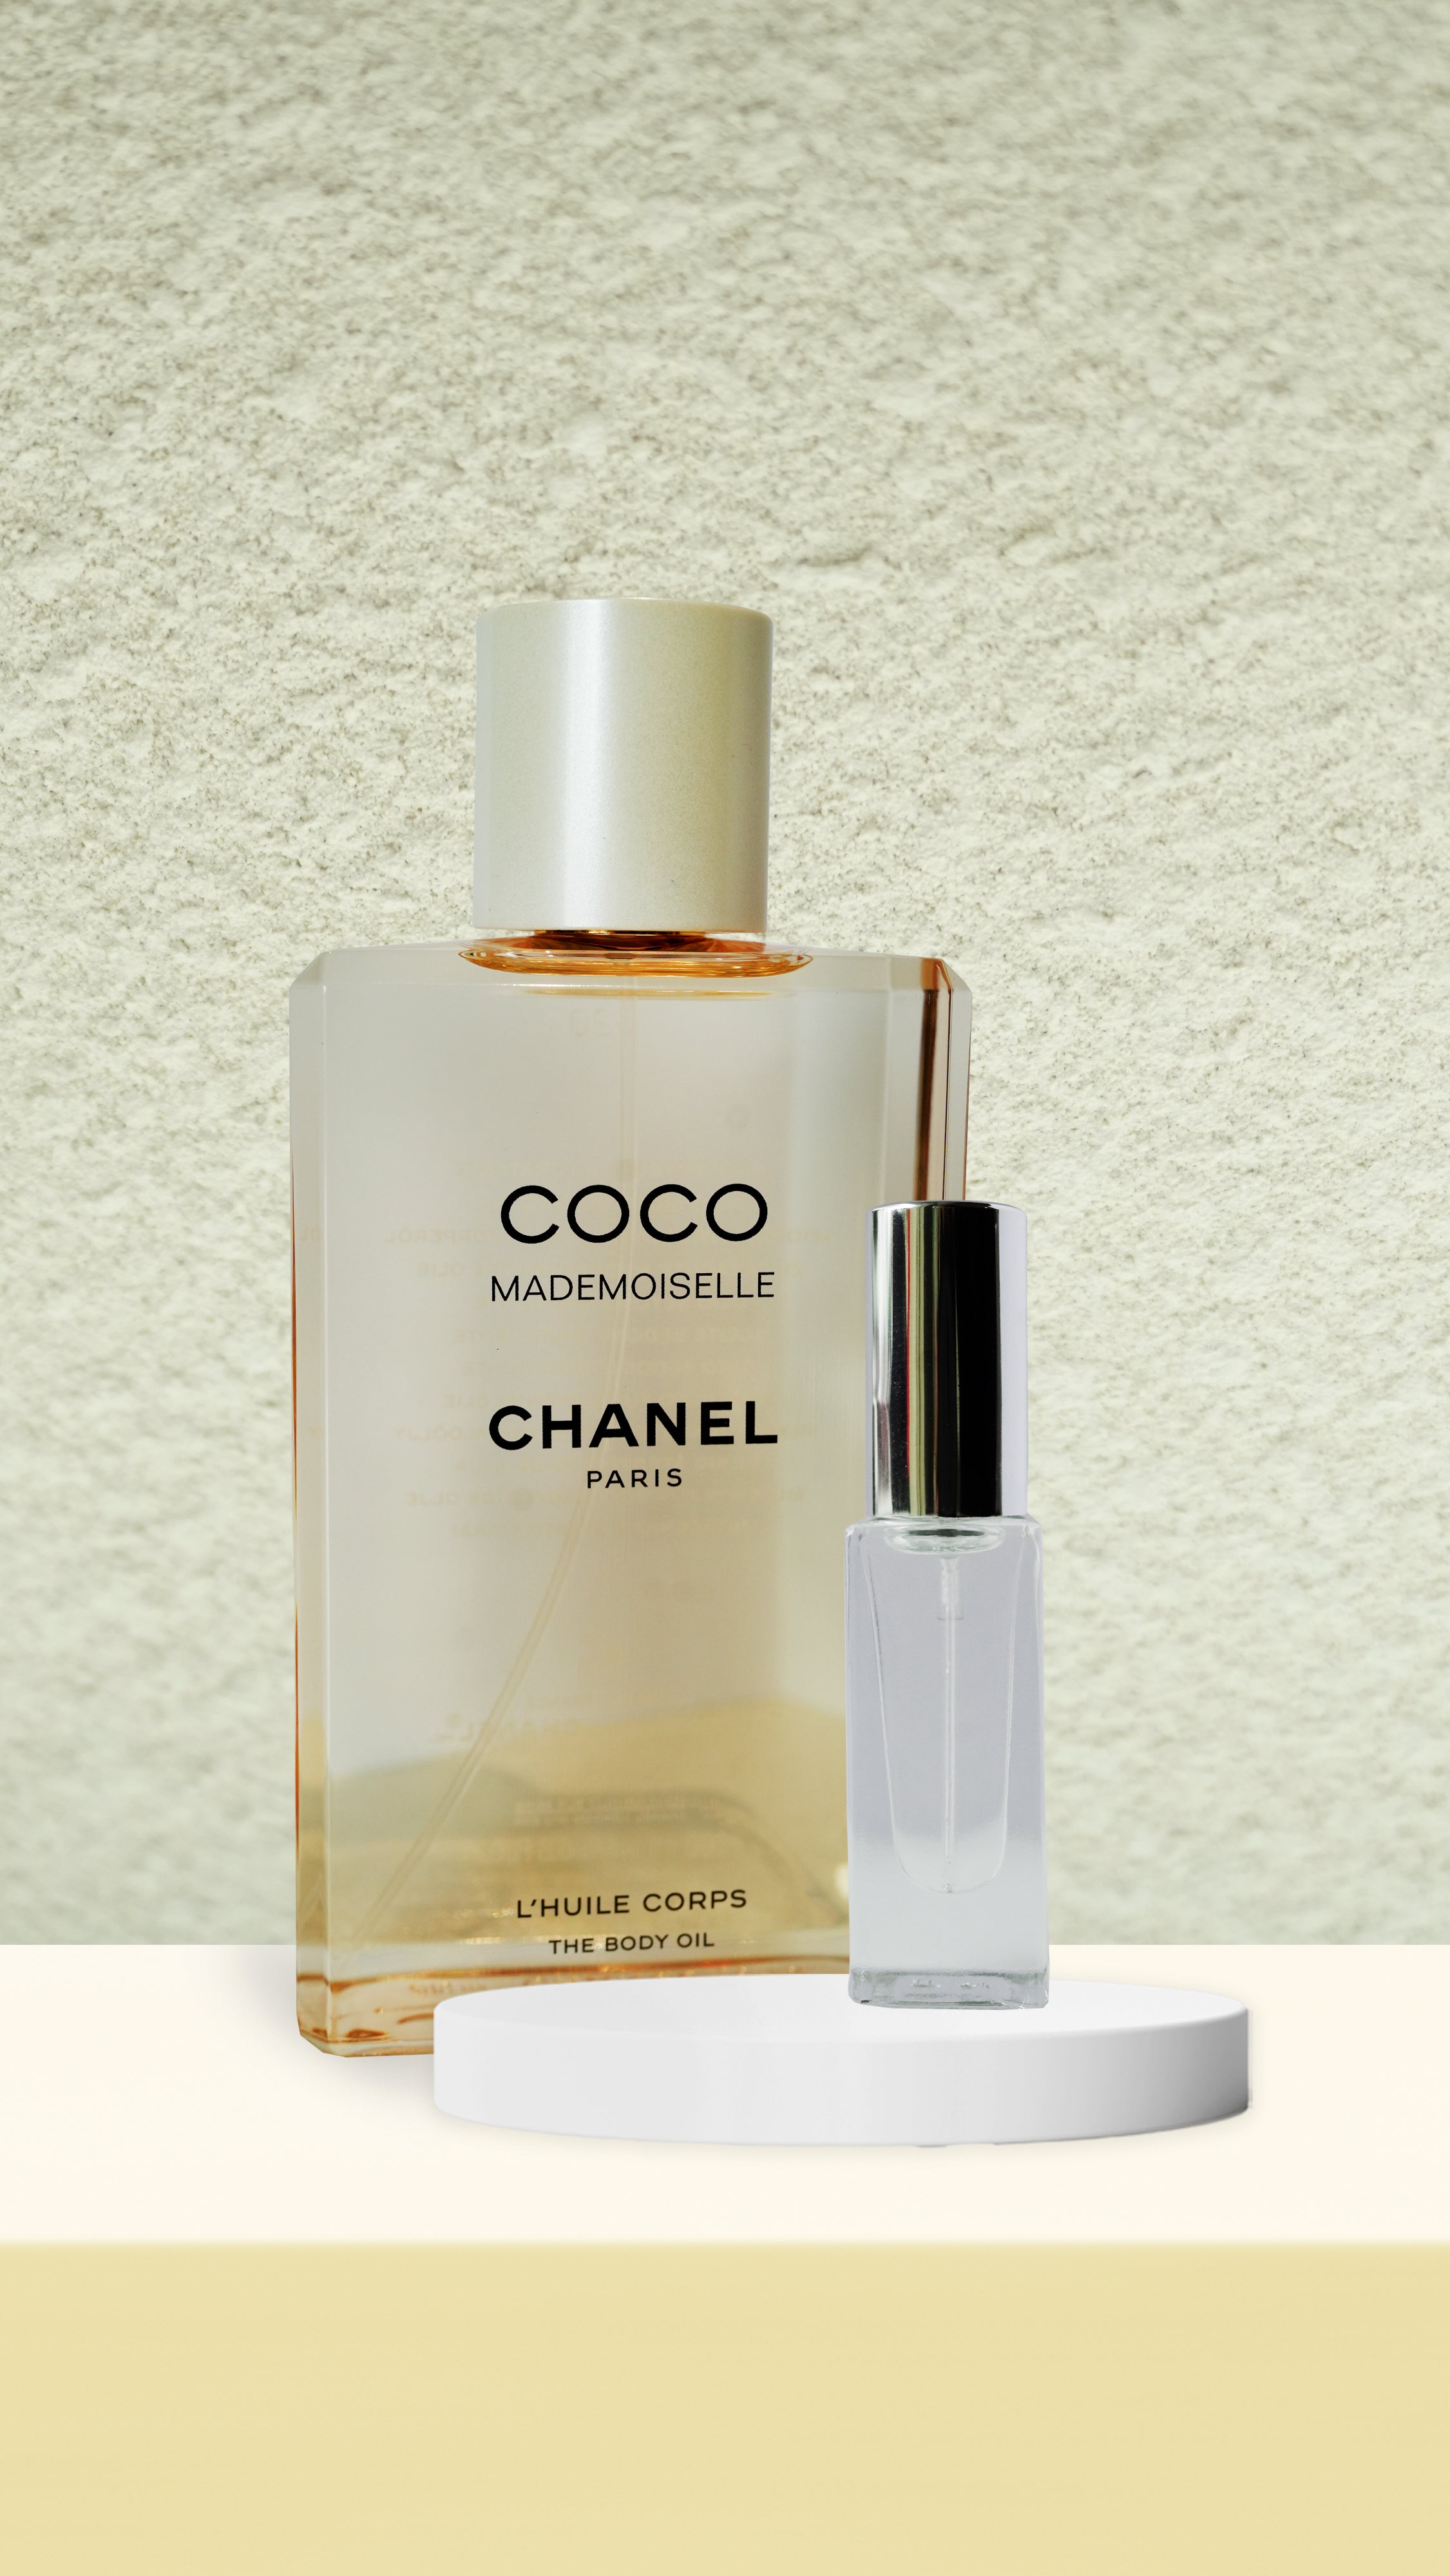 Chanel Coco Mademoiselle Body Oil Review